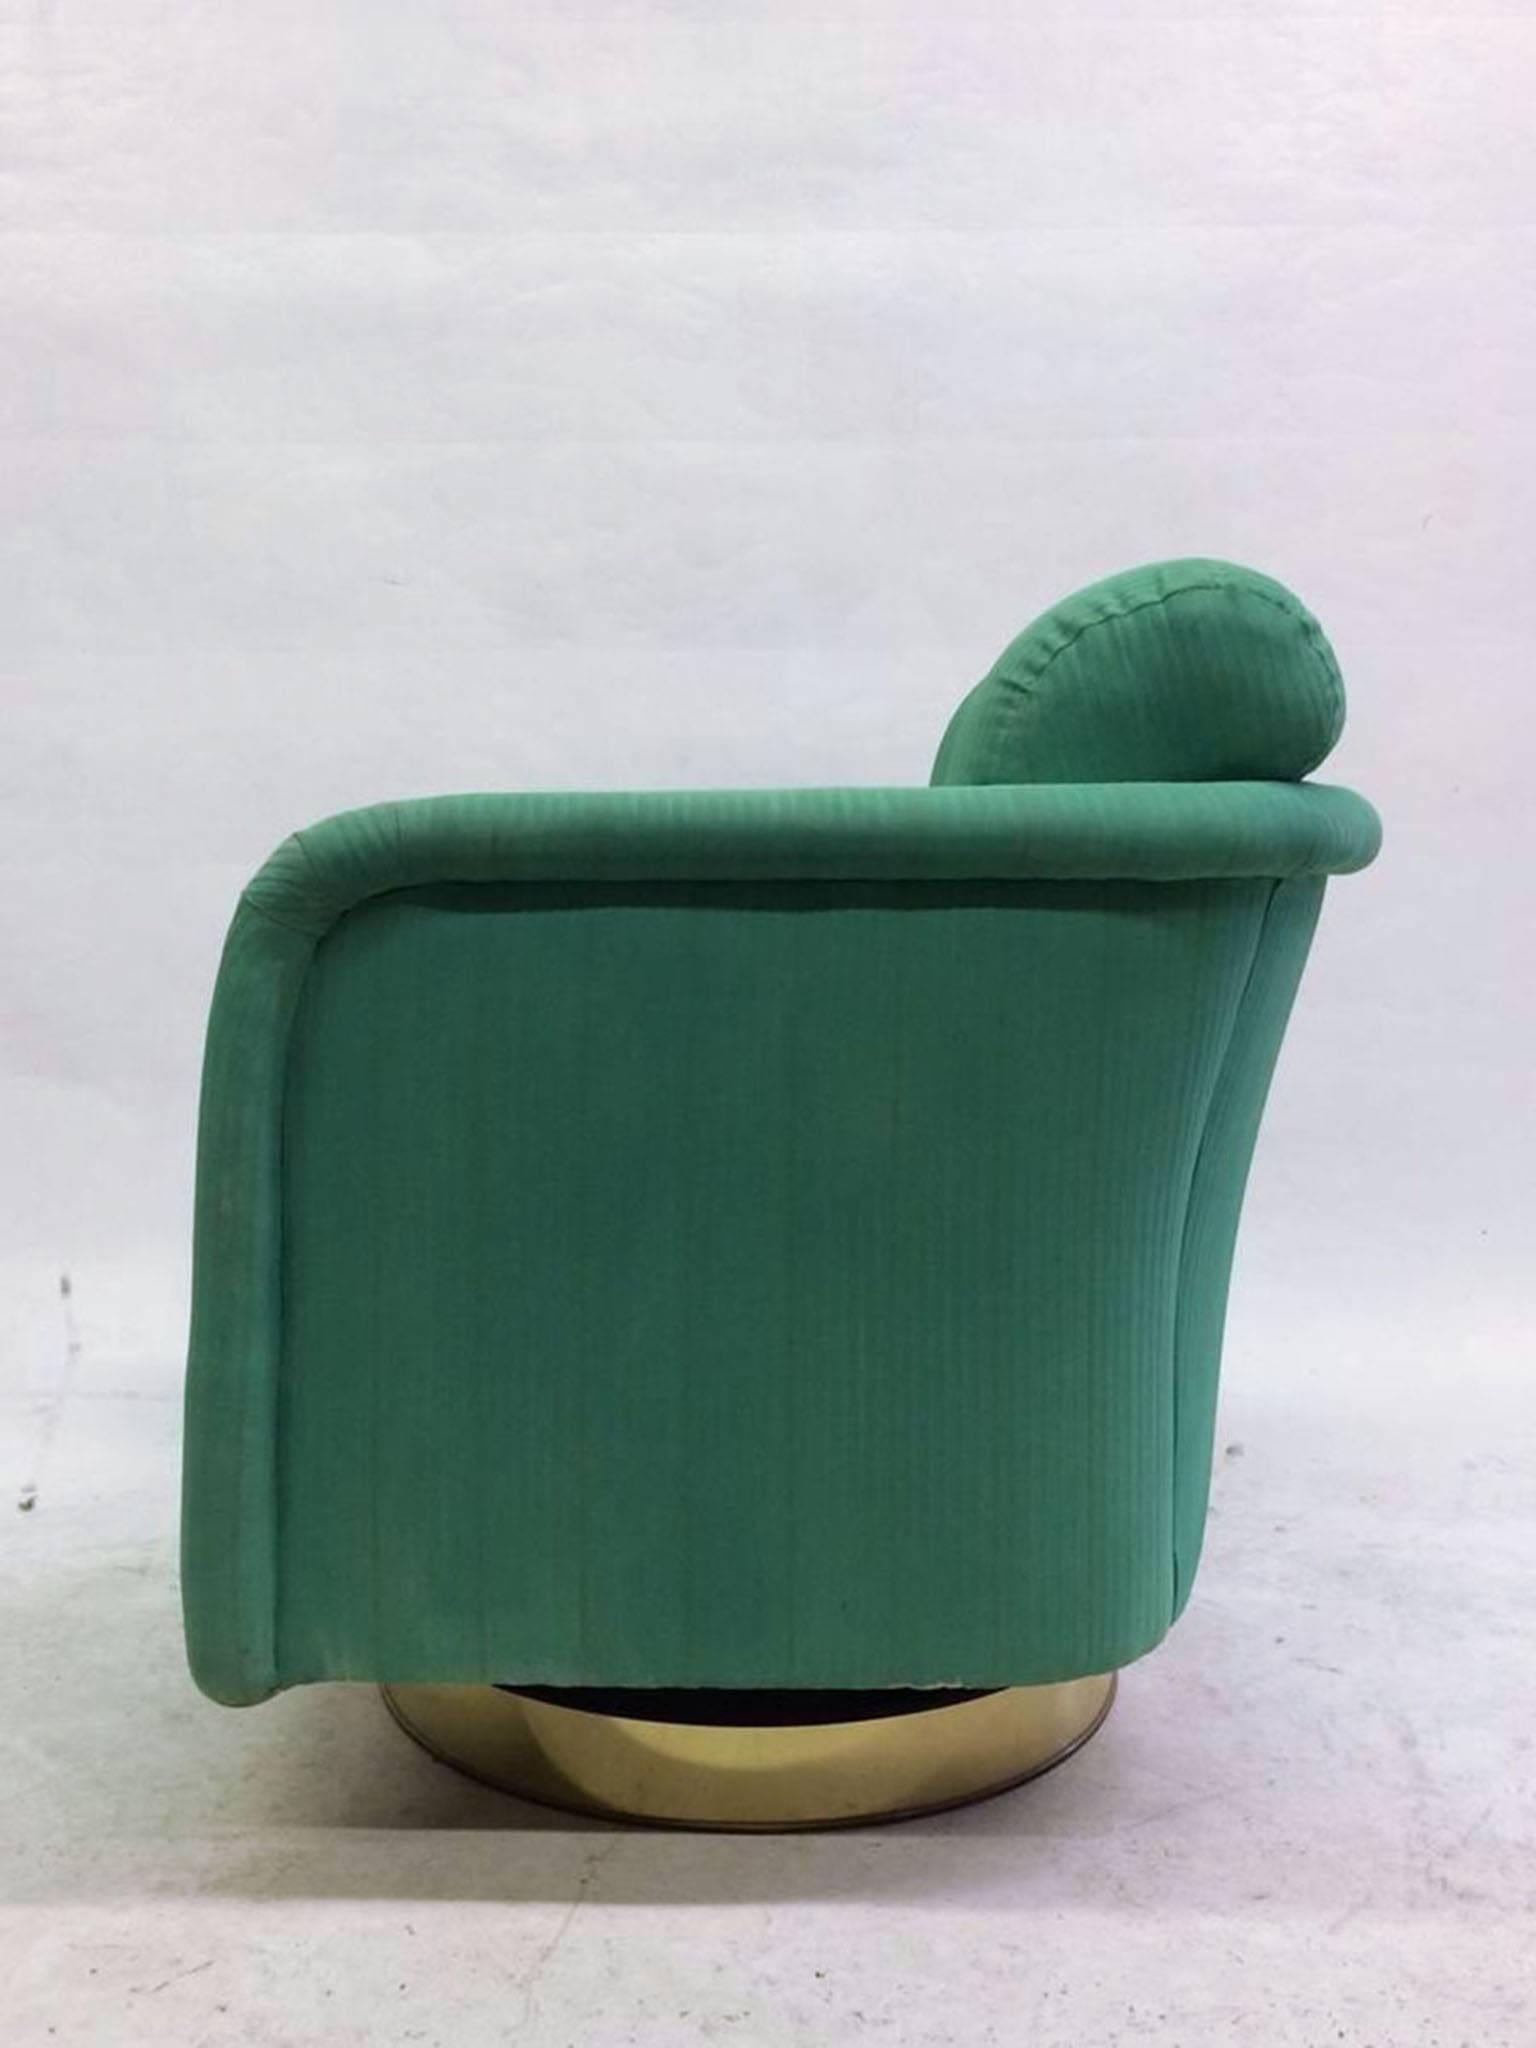 Swivel chair with a brass base designed by Milo Baughman.